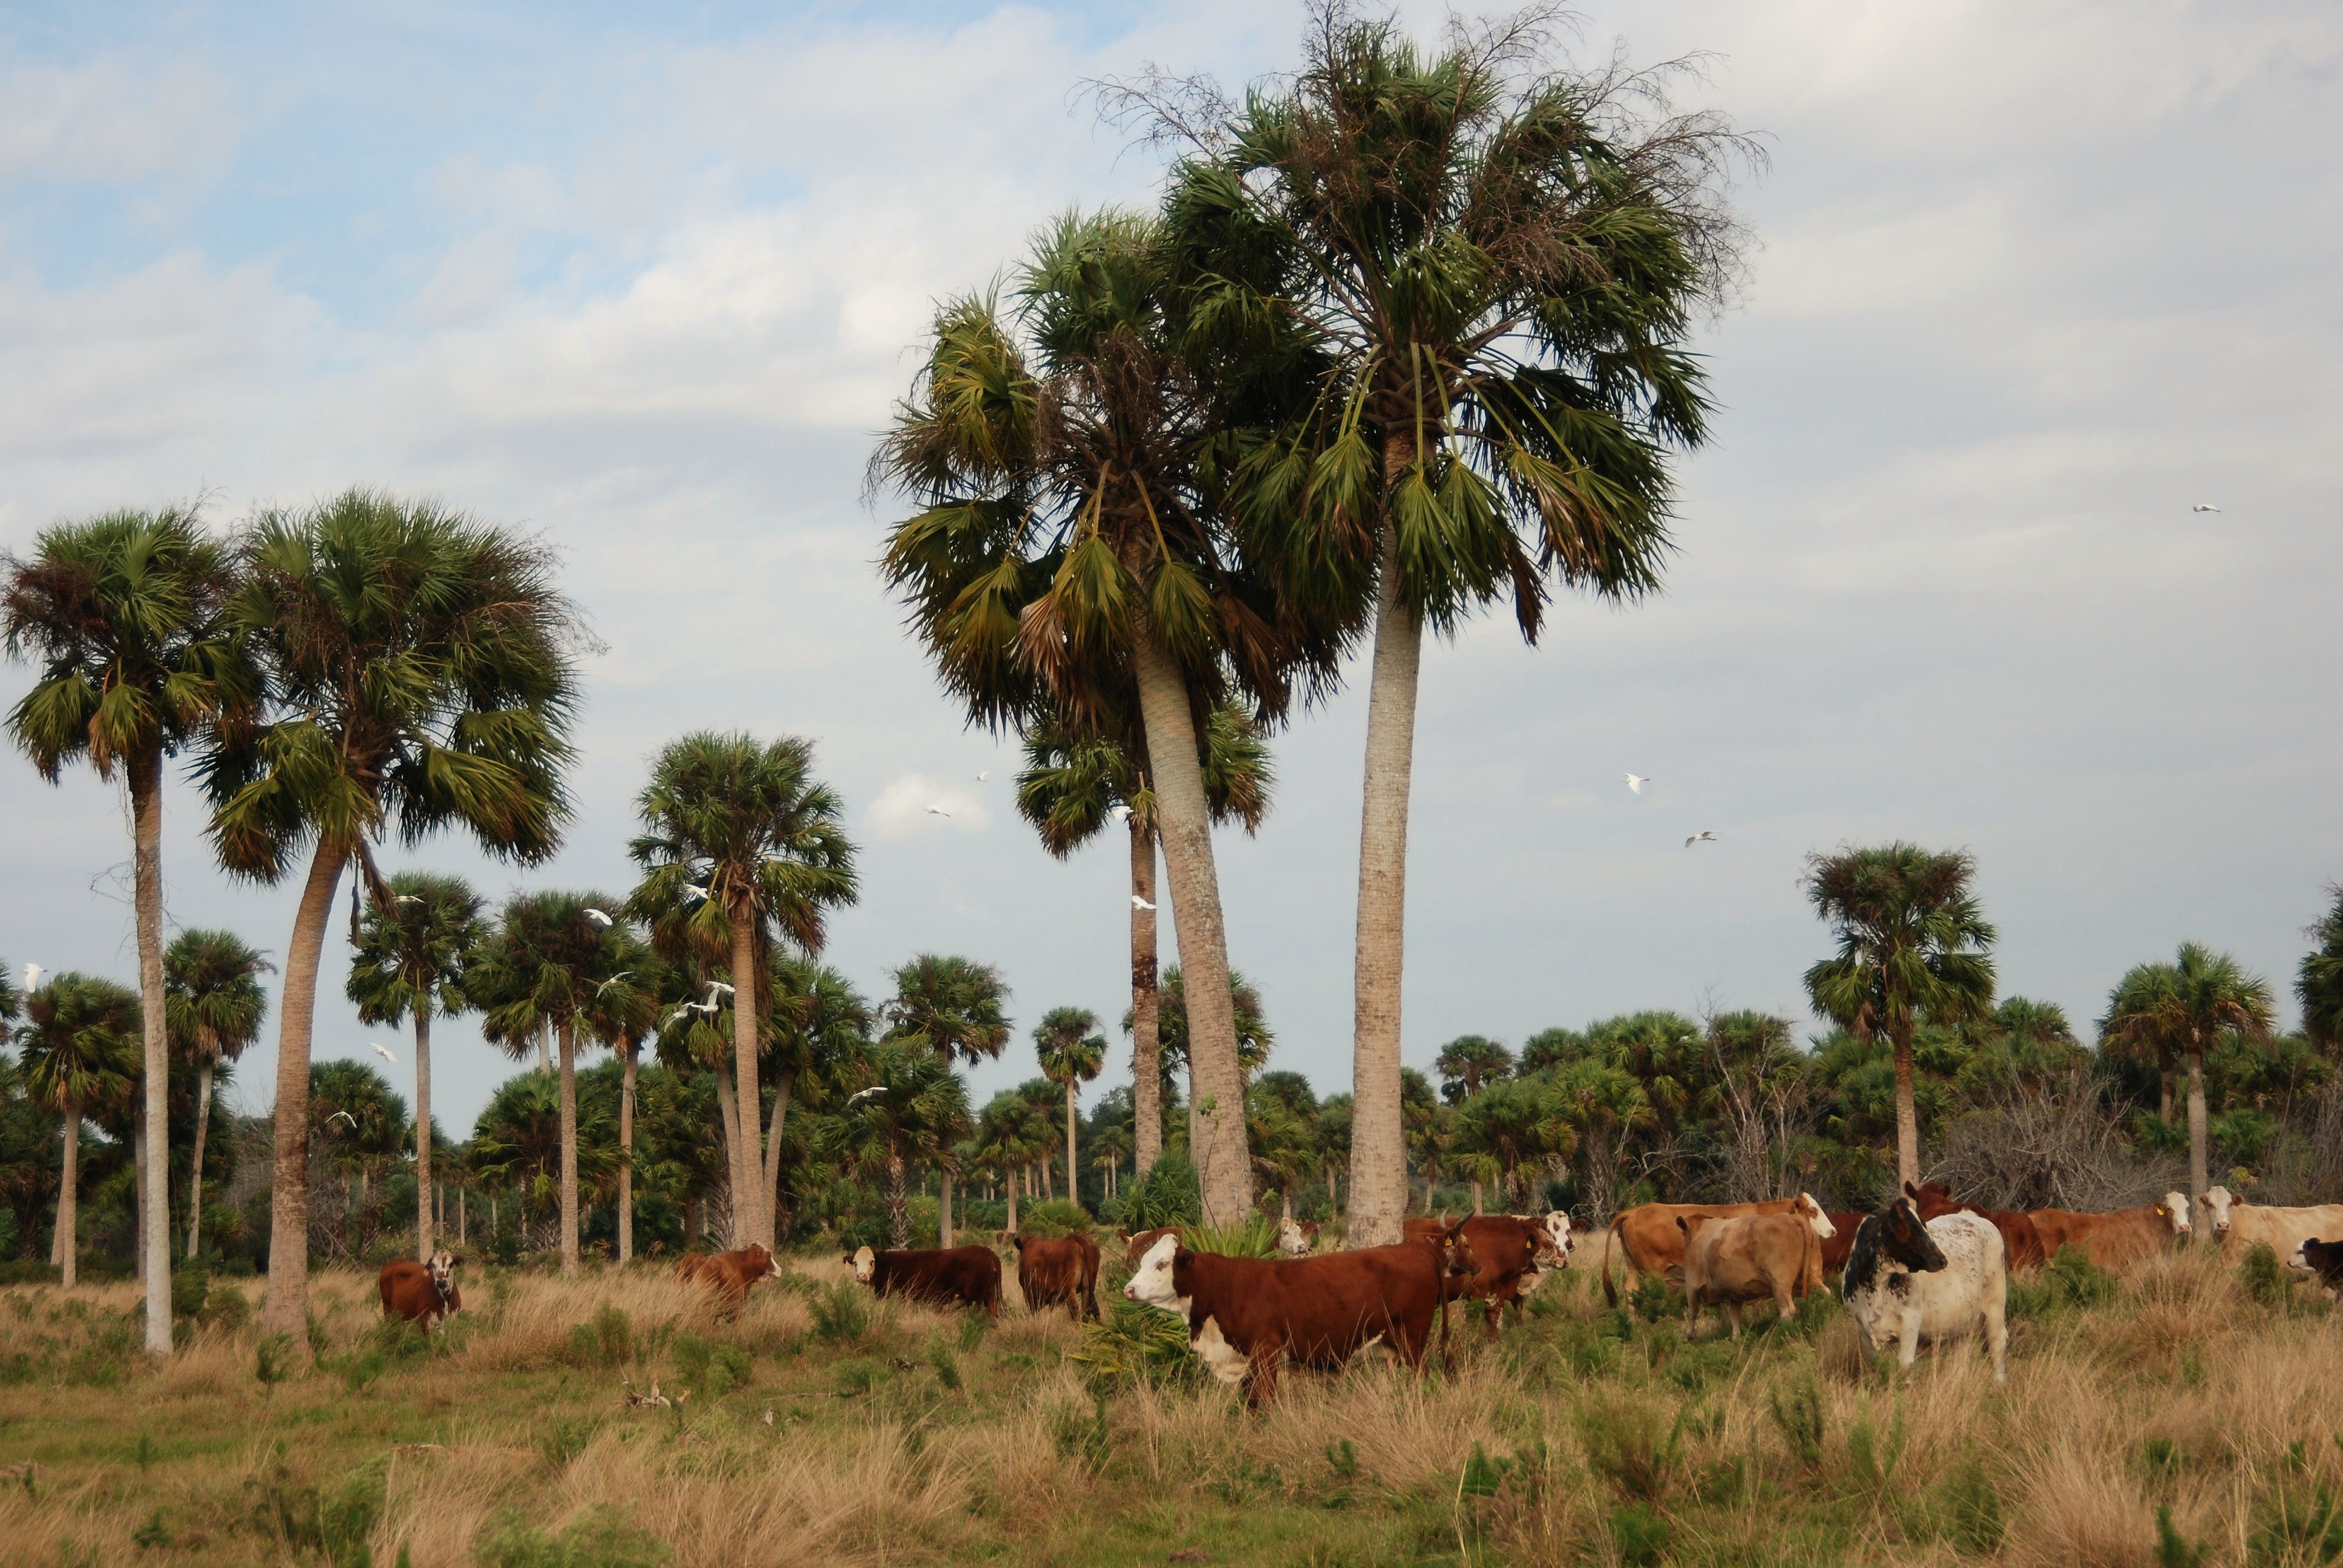 Modern cattle on old land.